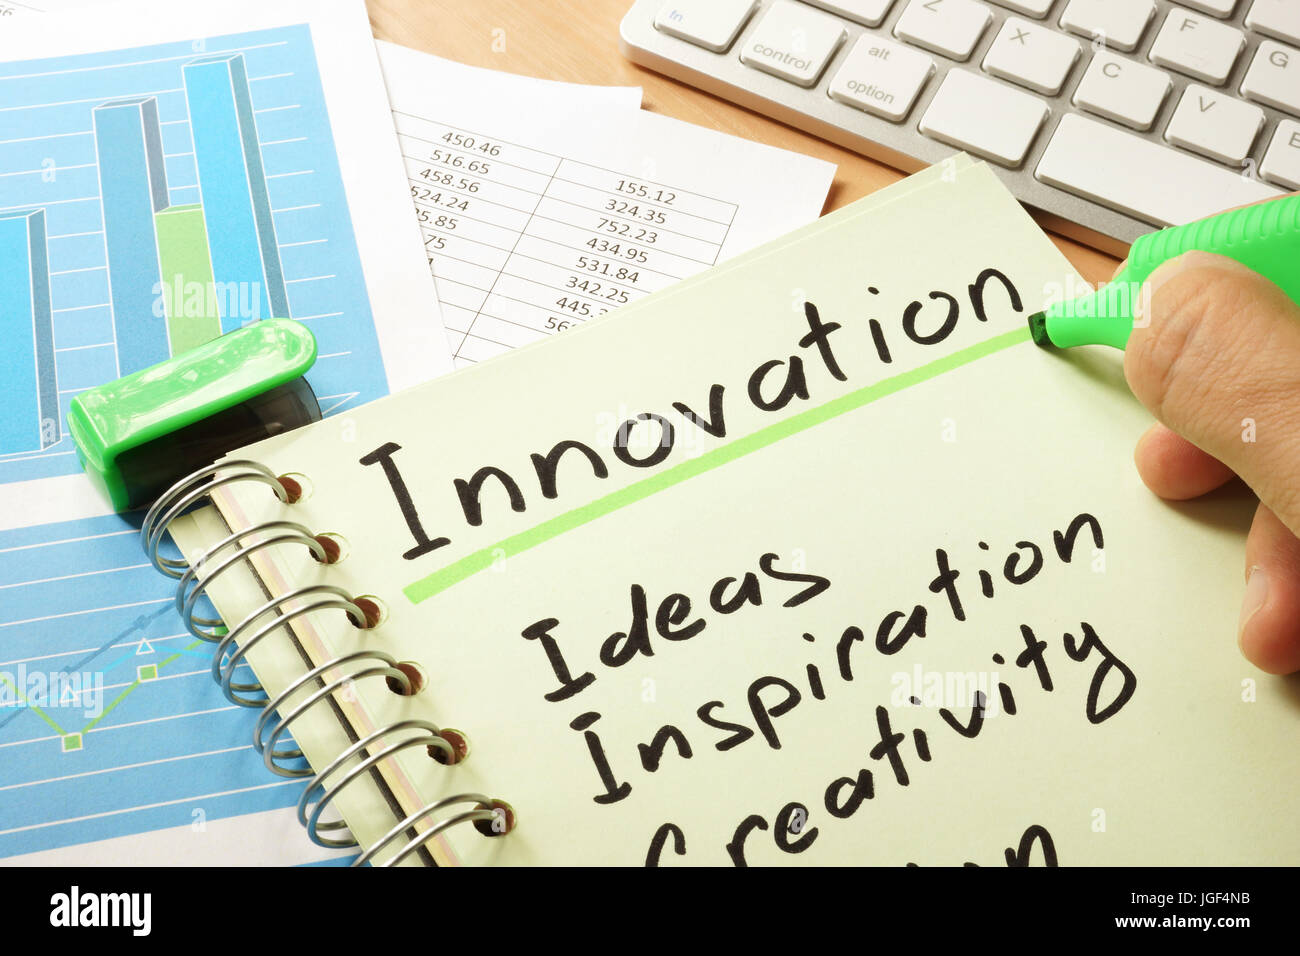 Innovation with list written in a note. Stock Photo